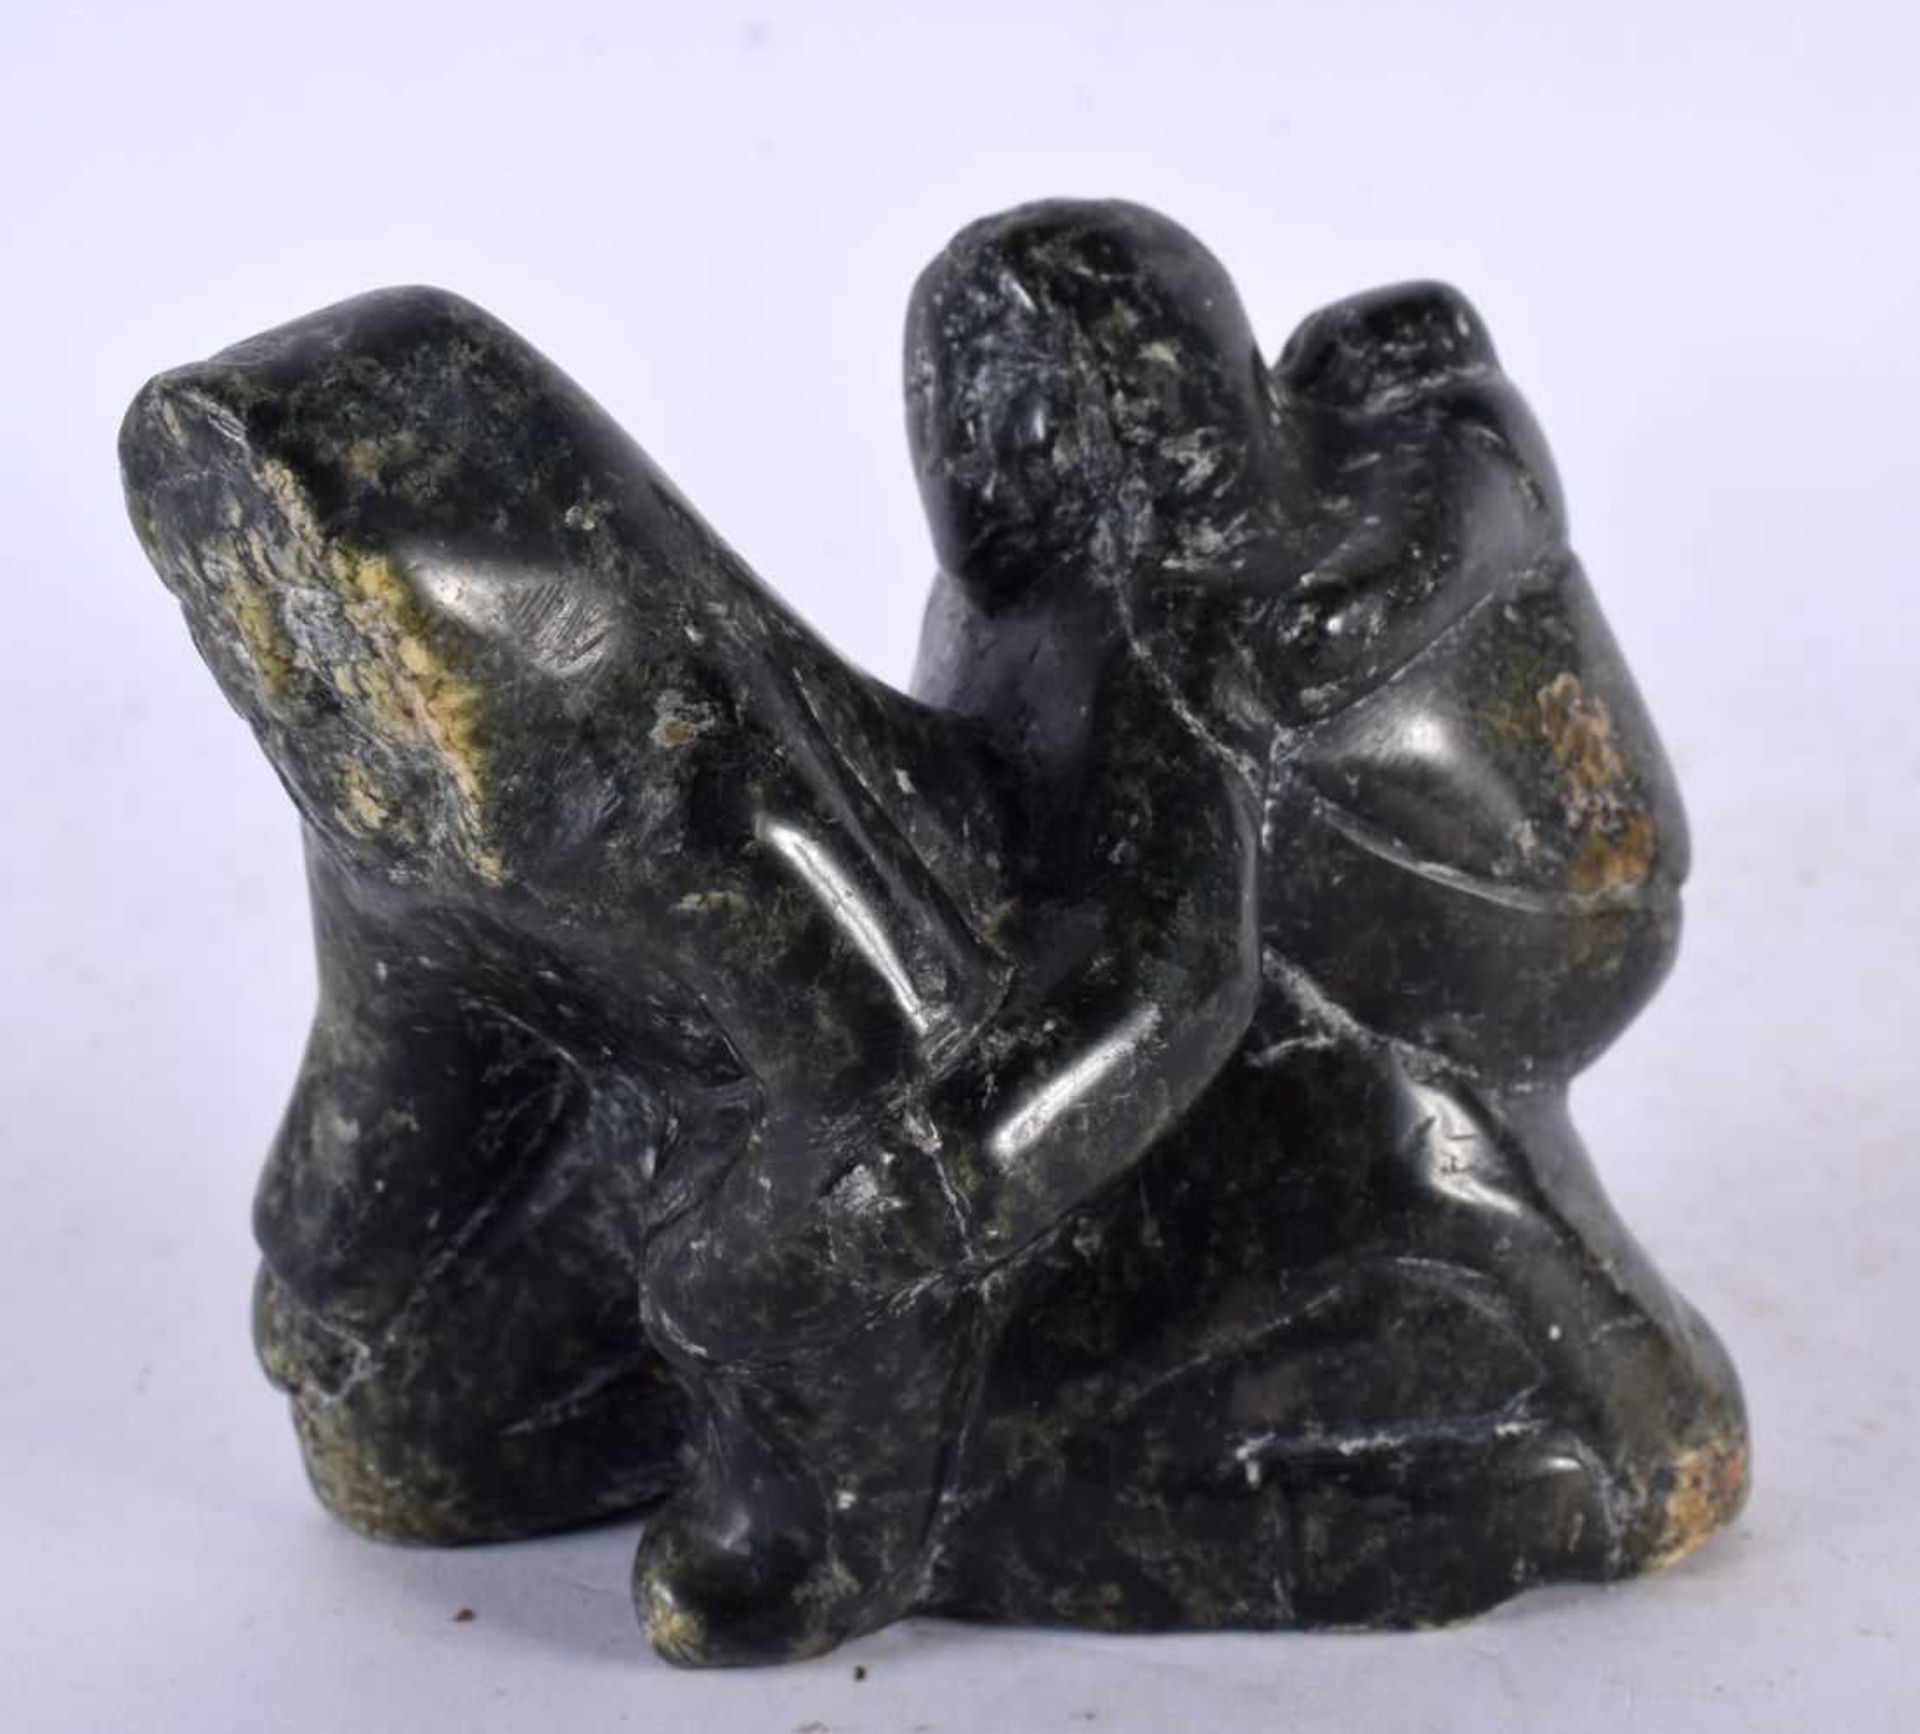 A NORTH AMERICAN INUIT TRIBAL CARVED STONE FIGURE OF A FAMILY. 9 cm x 8 cm.